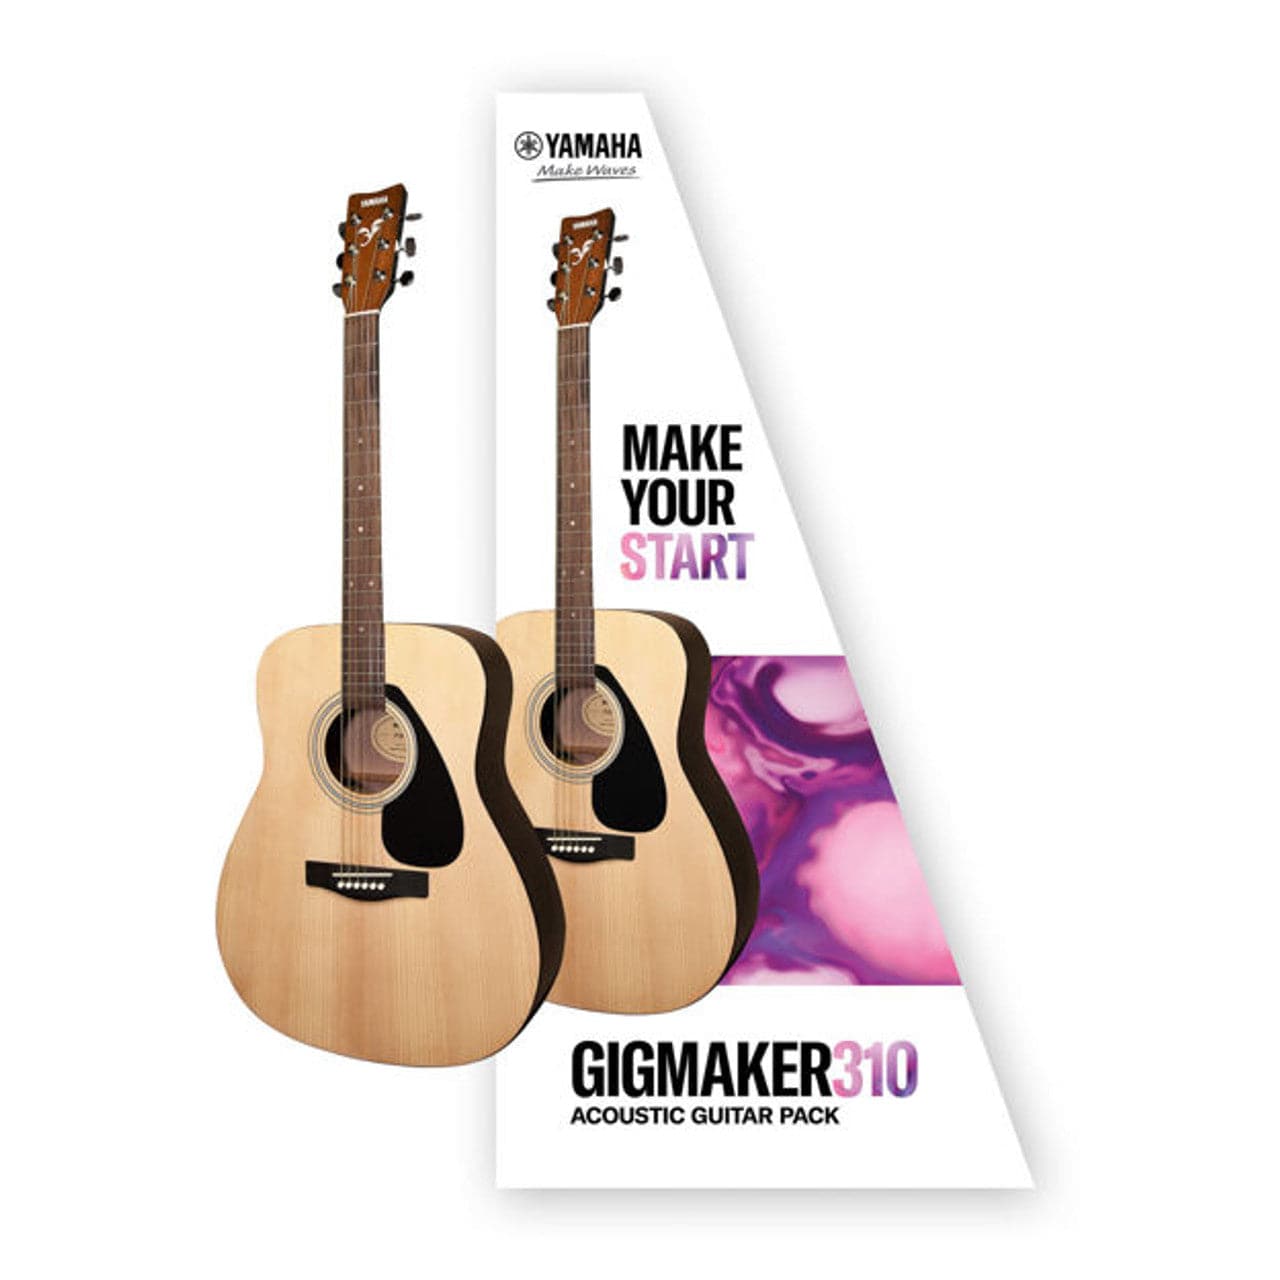 Yamaha F310P Gigmaker Acoustic Guitar Pack - Joondalup Music Centre